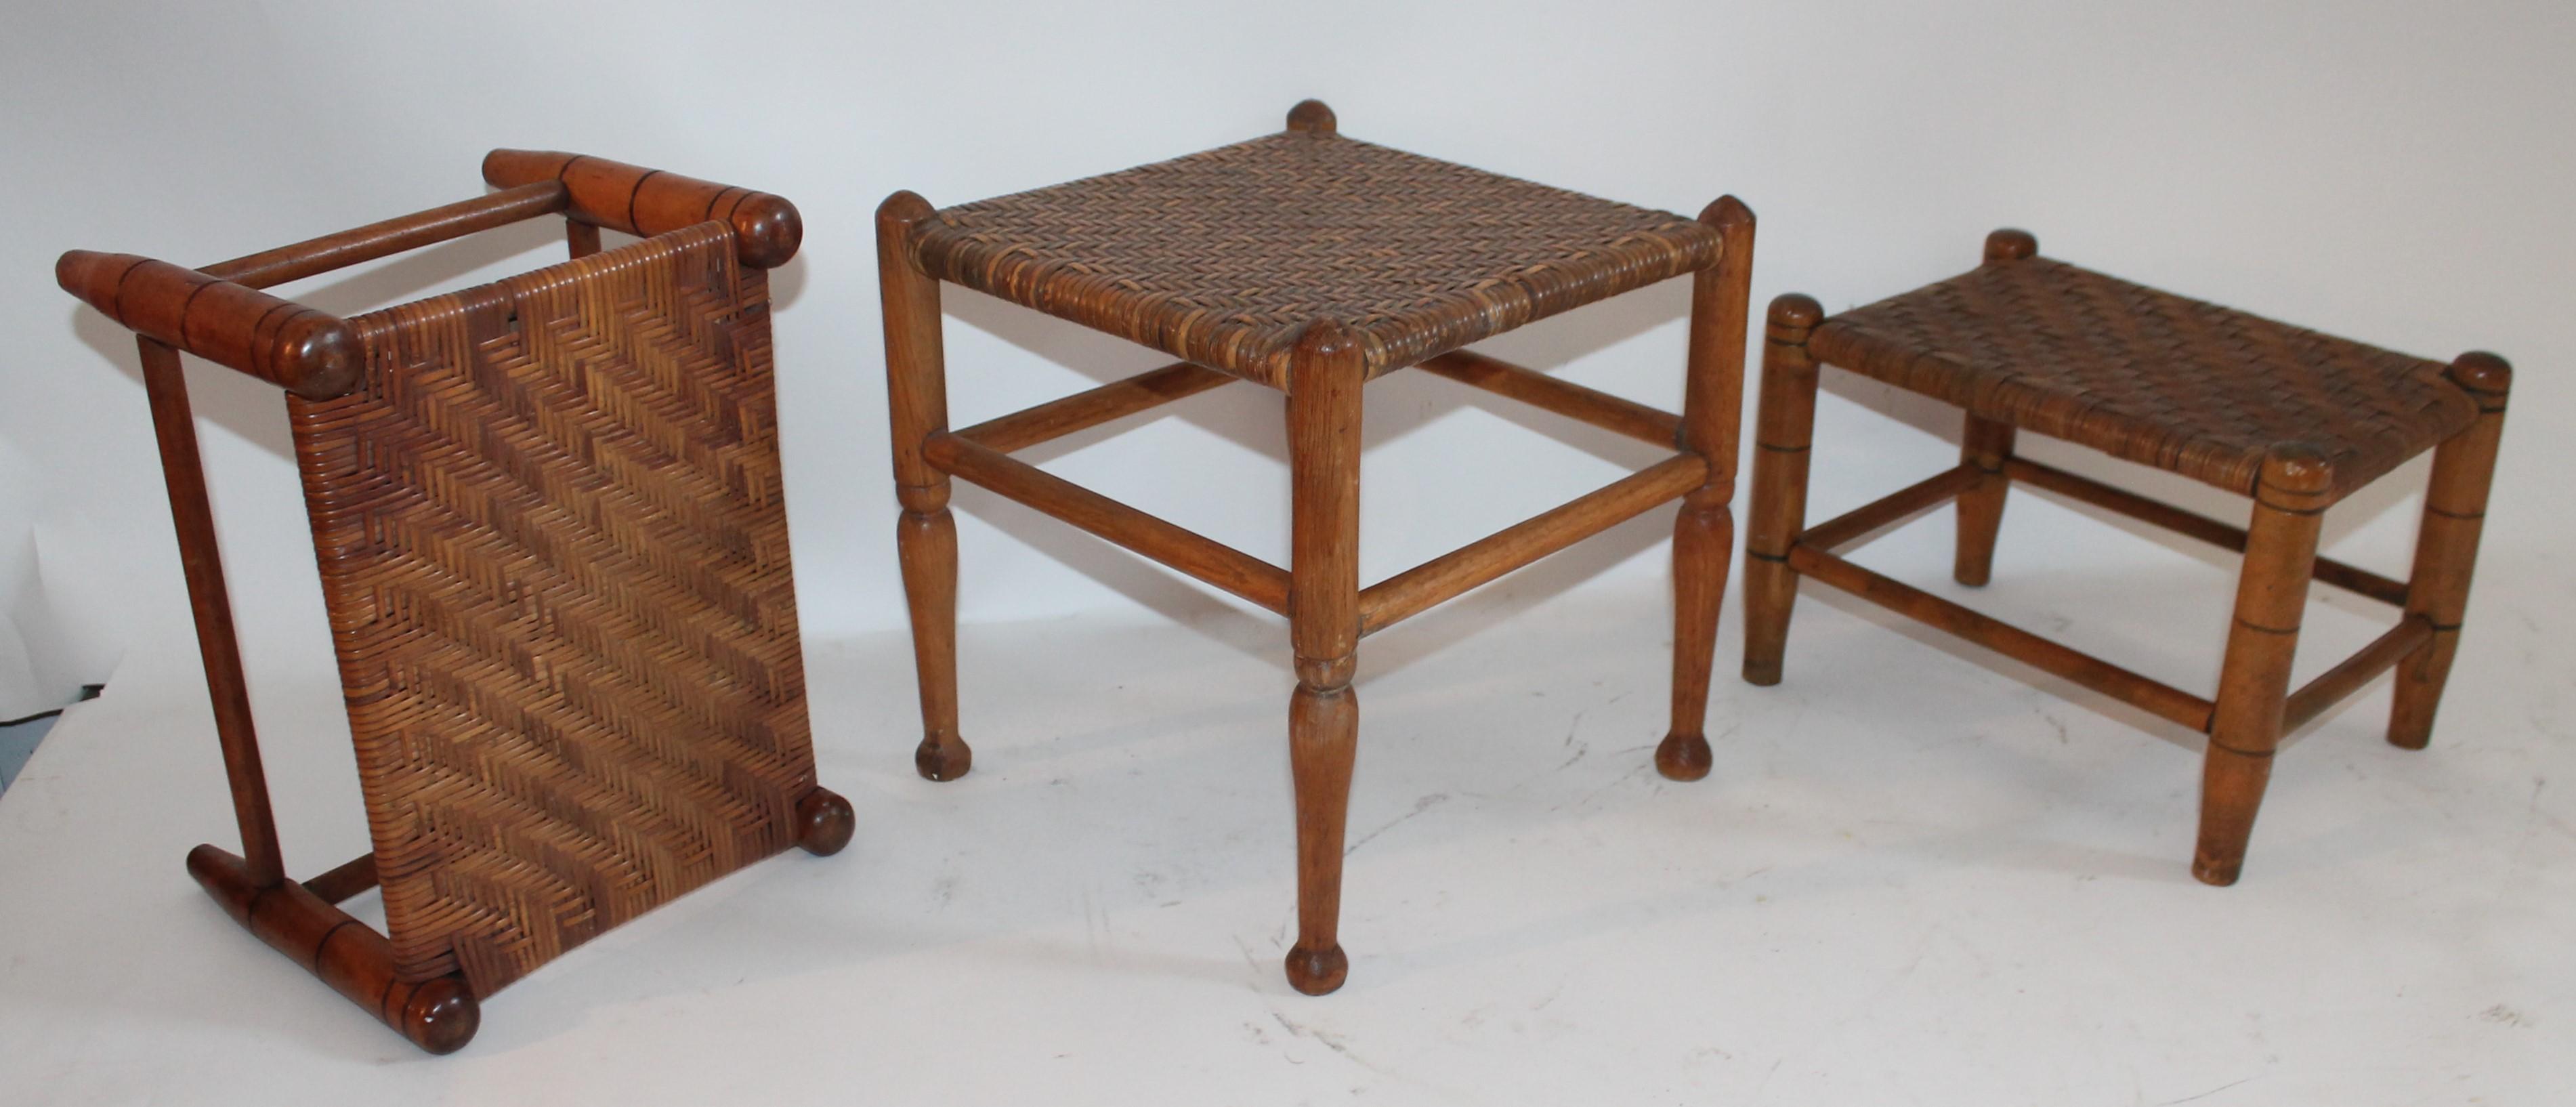 19th century collection of three foot stools with turned legs and hand woven seat. All stools are in fine condition.

Large foot stool measures 11.5 x 1.5 x 12
Both smaller foot stools measure 10 x 12 x 8.